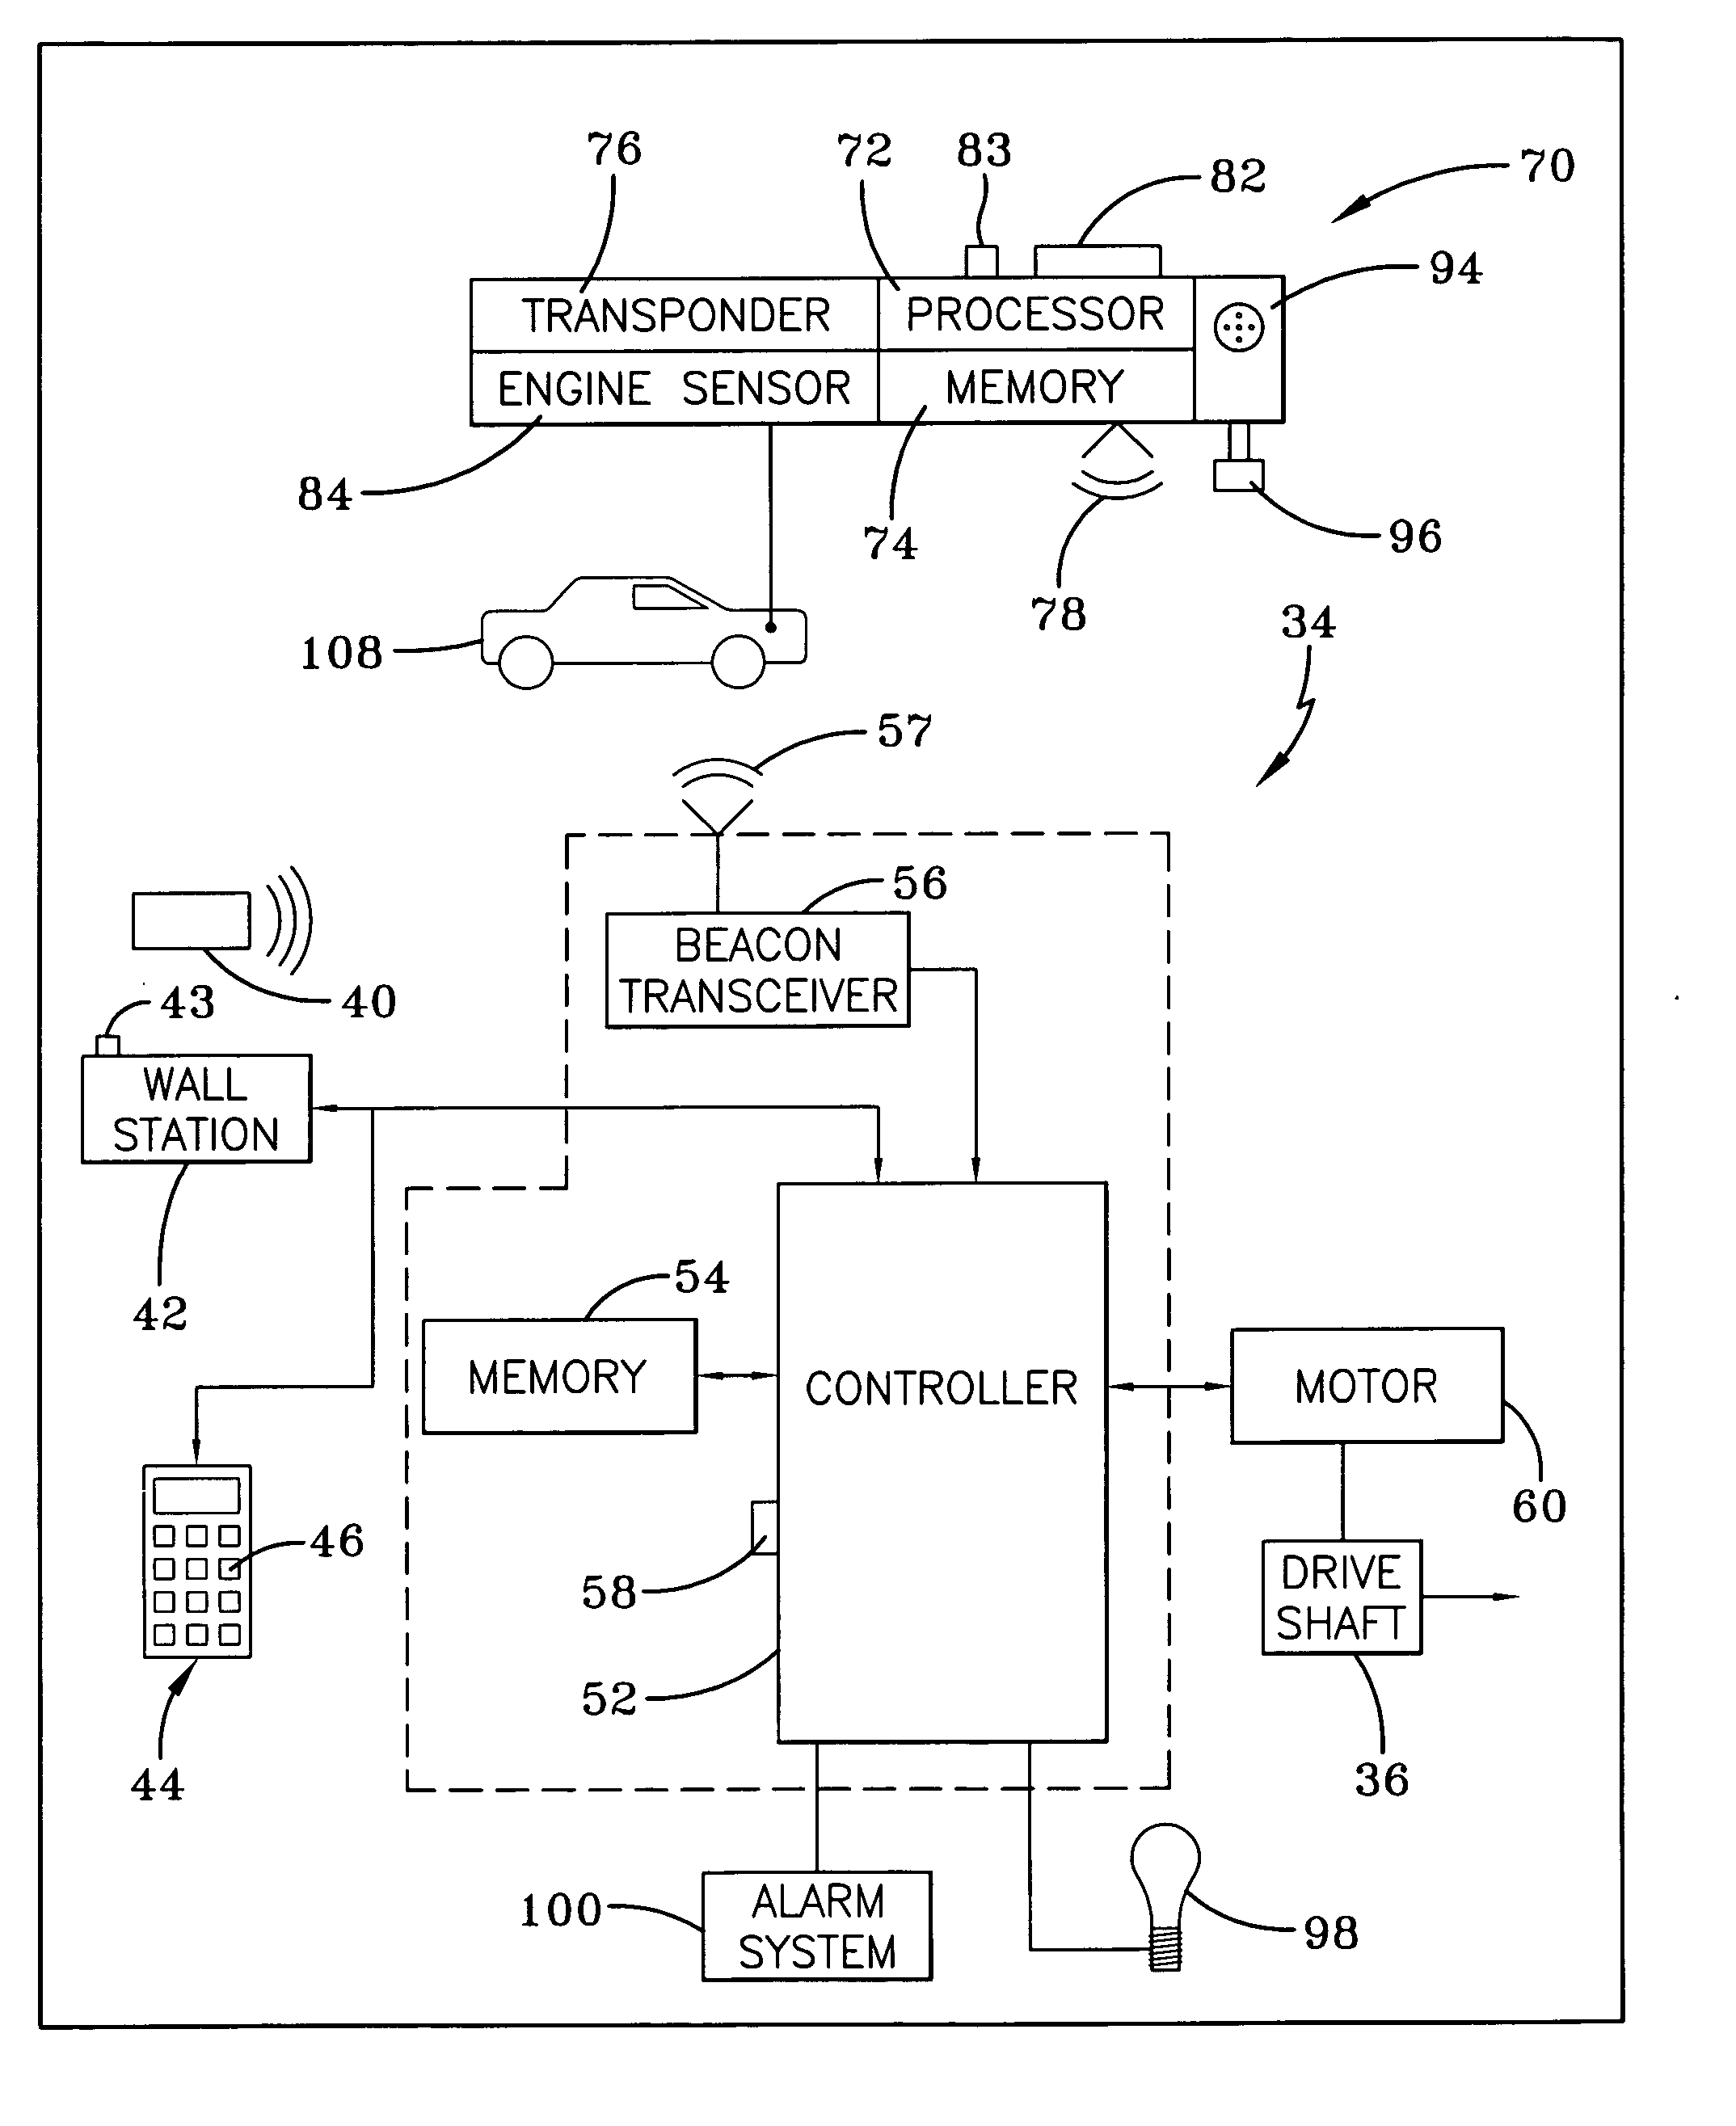 System for automatically moving access barriers and methods for adjusting system sensitivity